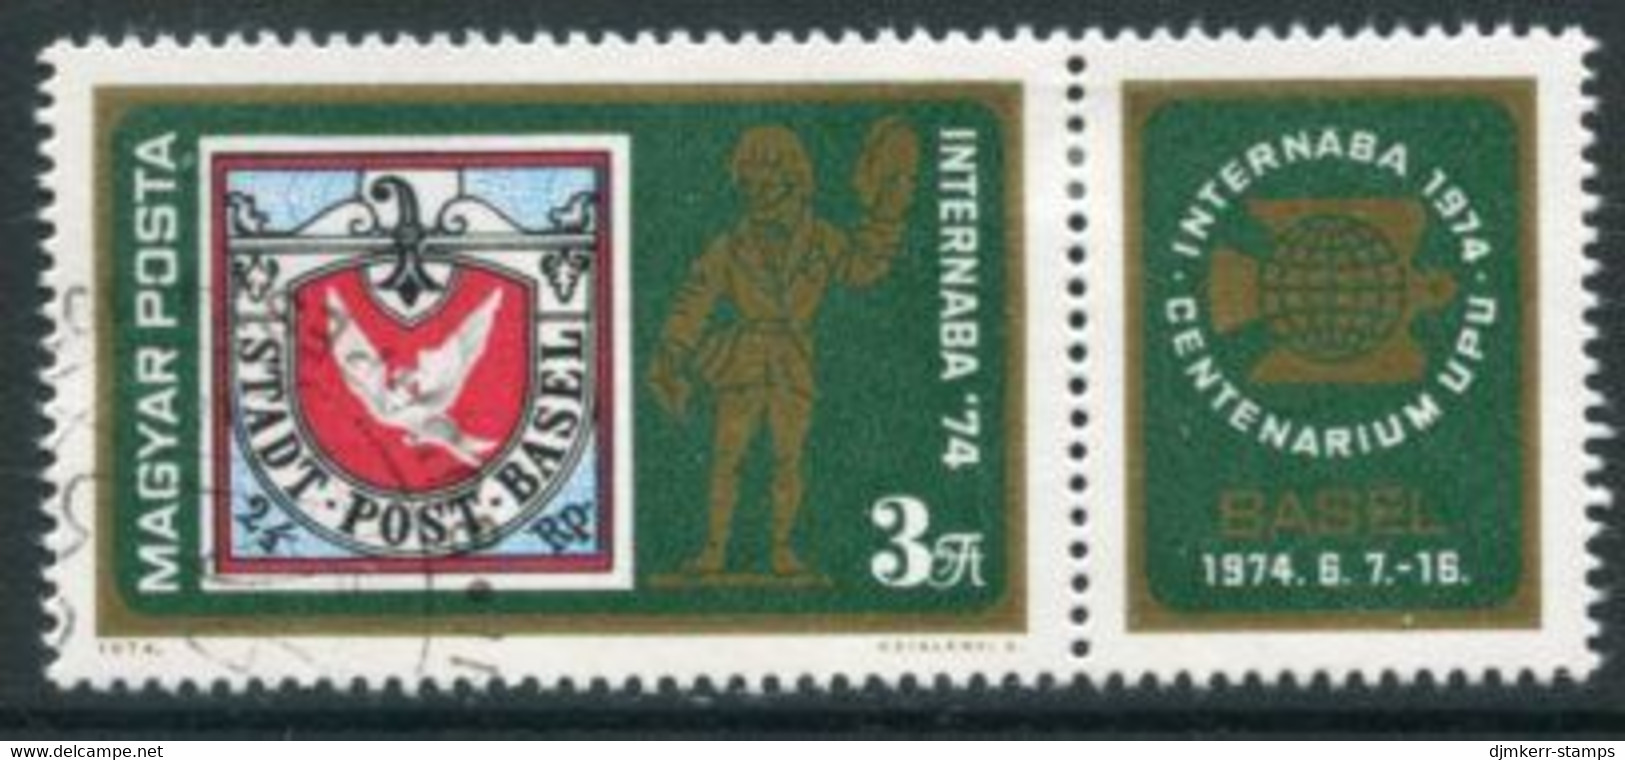 HUNGARY 1974 INTERNABA Stamp Exhibition Used.  Michel 2956 - Oblitérés